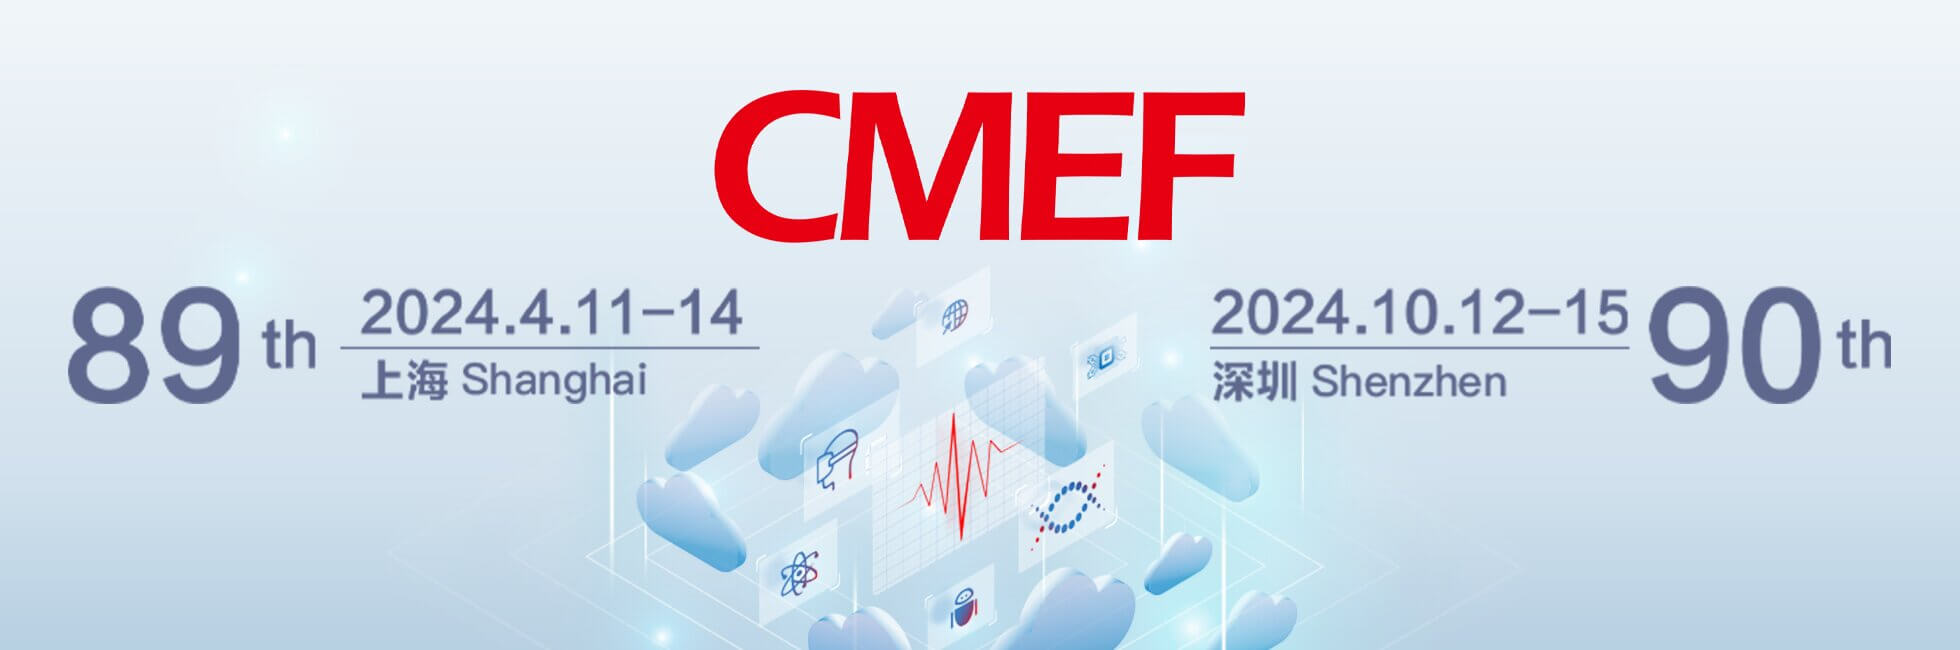 BNS will attend the 89th China International Medical Equipment (Spring) Fair (CMEF) .